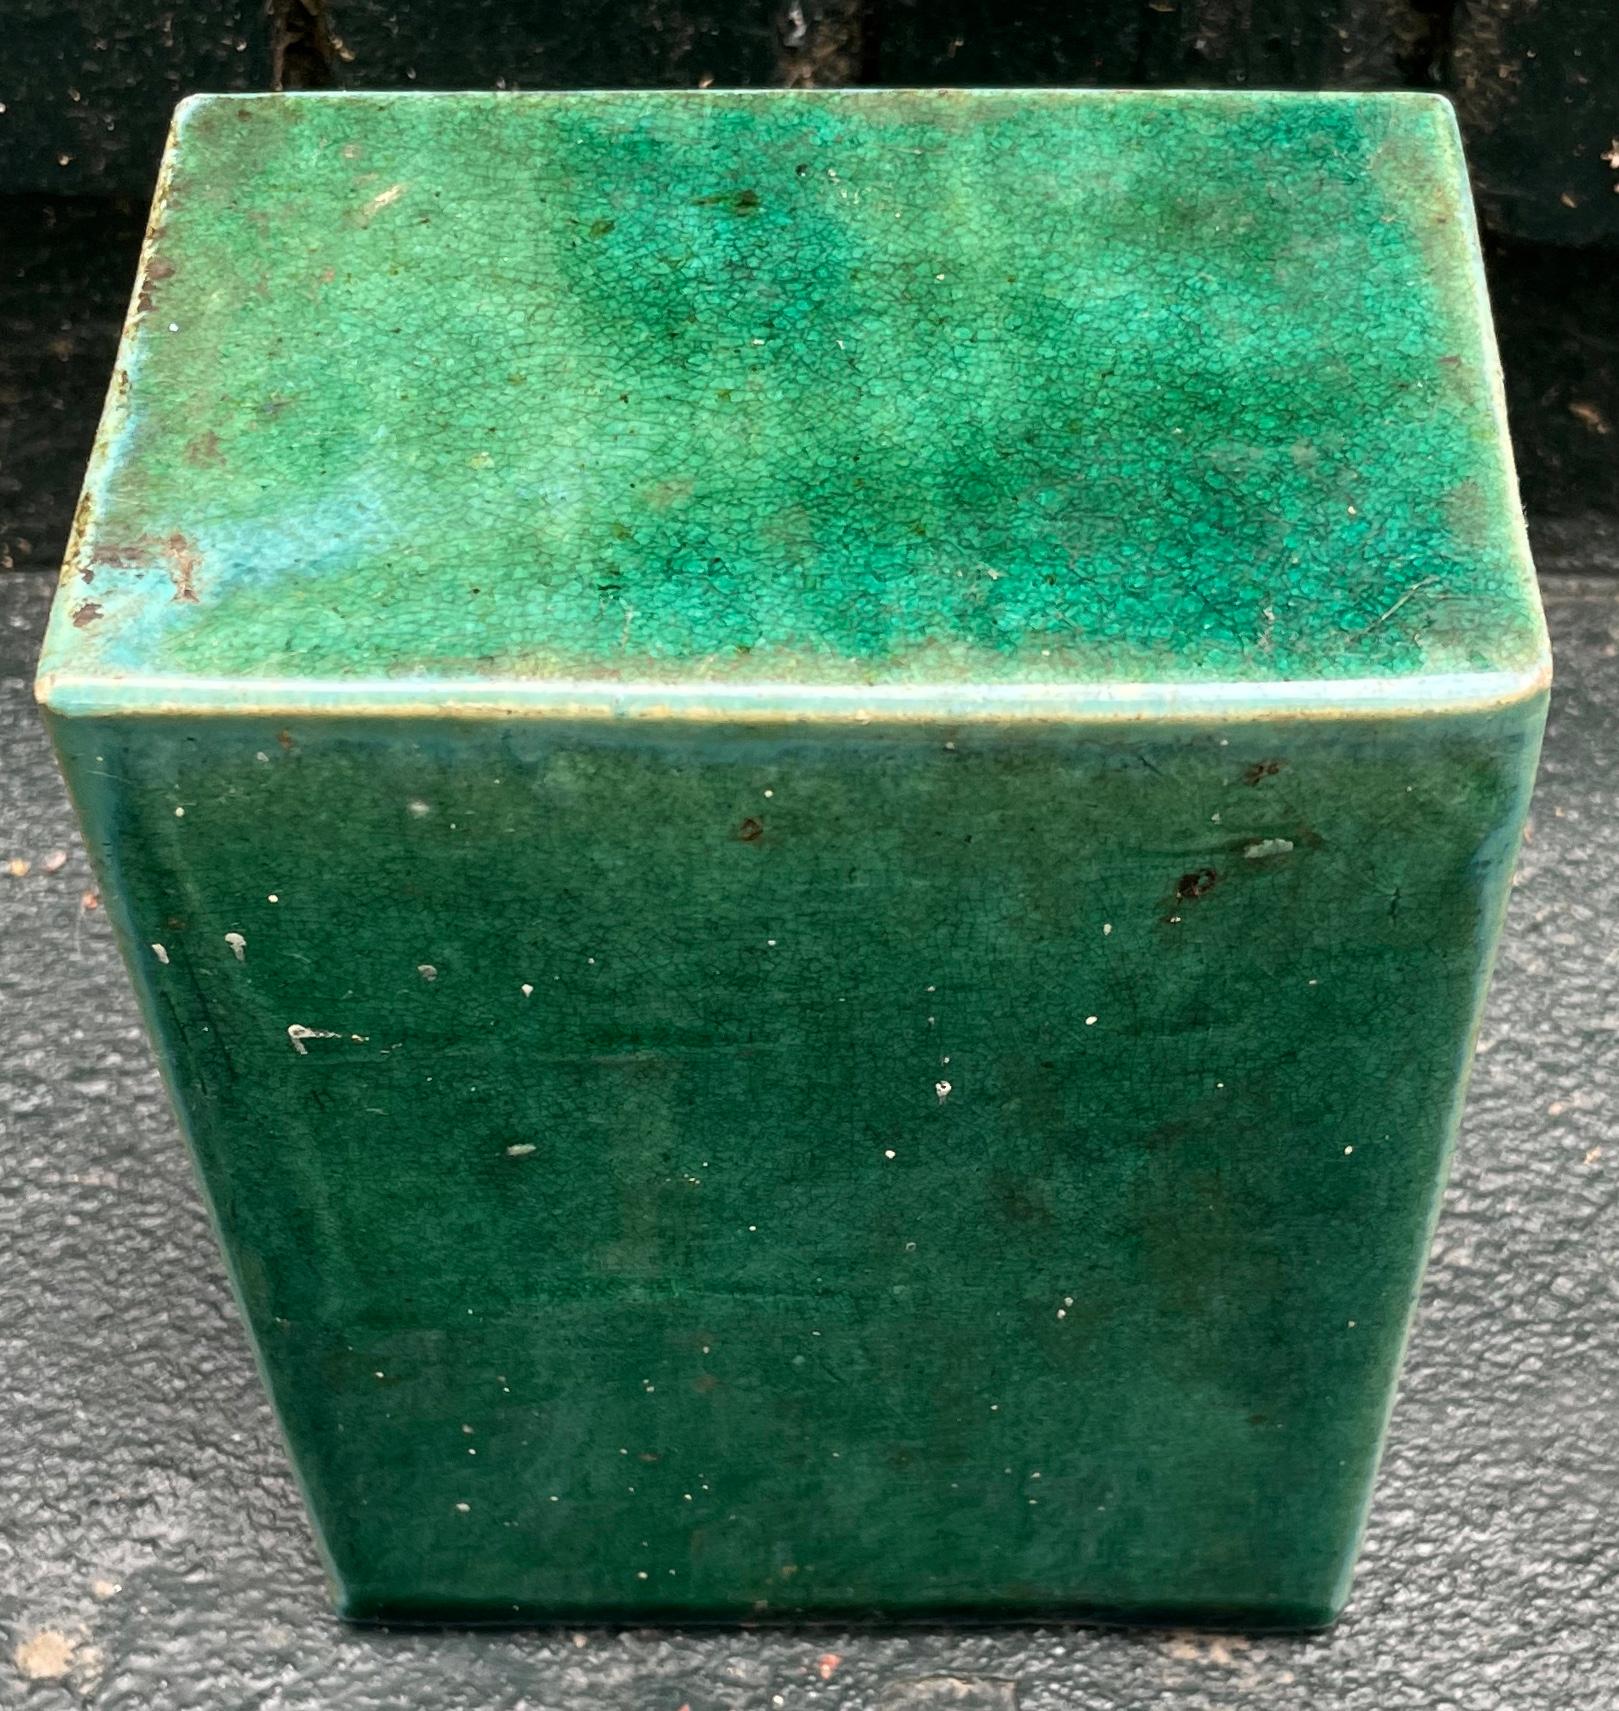 Blue green Chinese glazed ceramic block stand. Late 19th early 20th century mottled green blue glazed rectangular block. China, late 19th - early 20th century 
Dimensions: 6.75